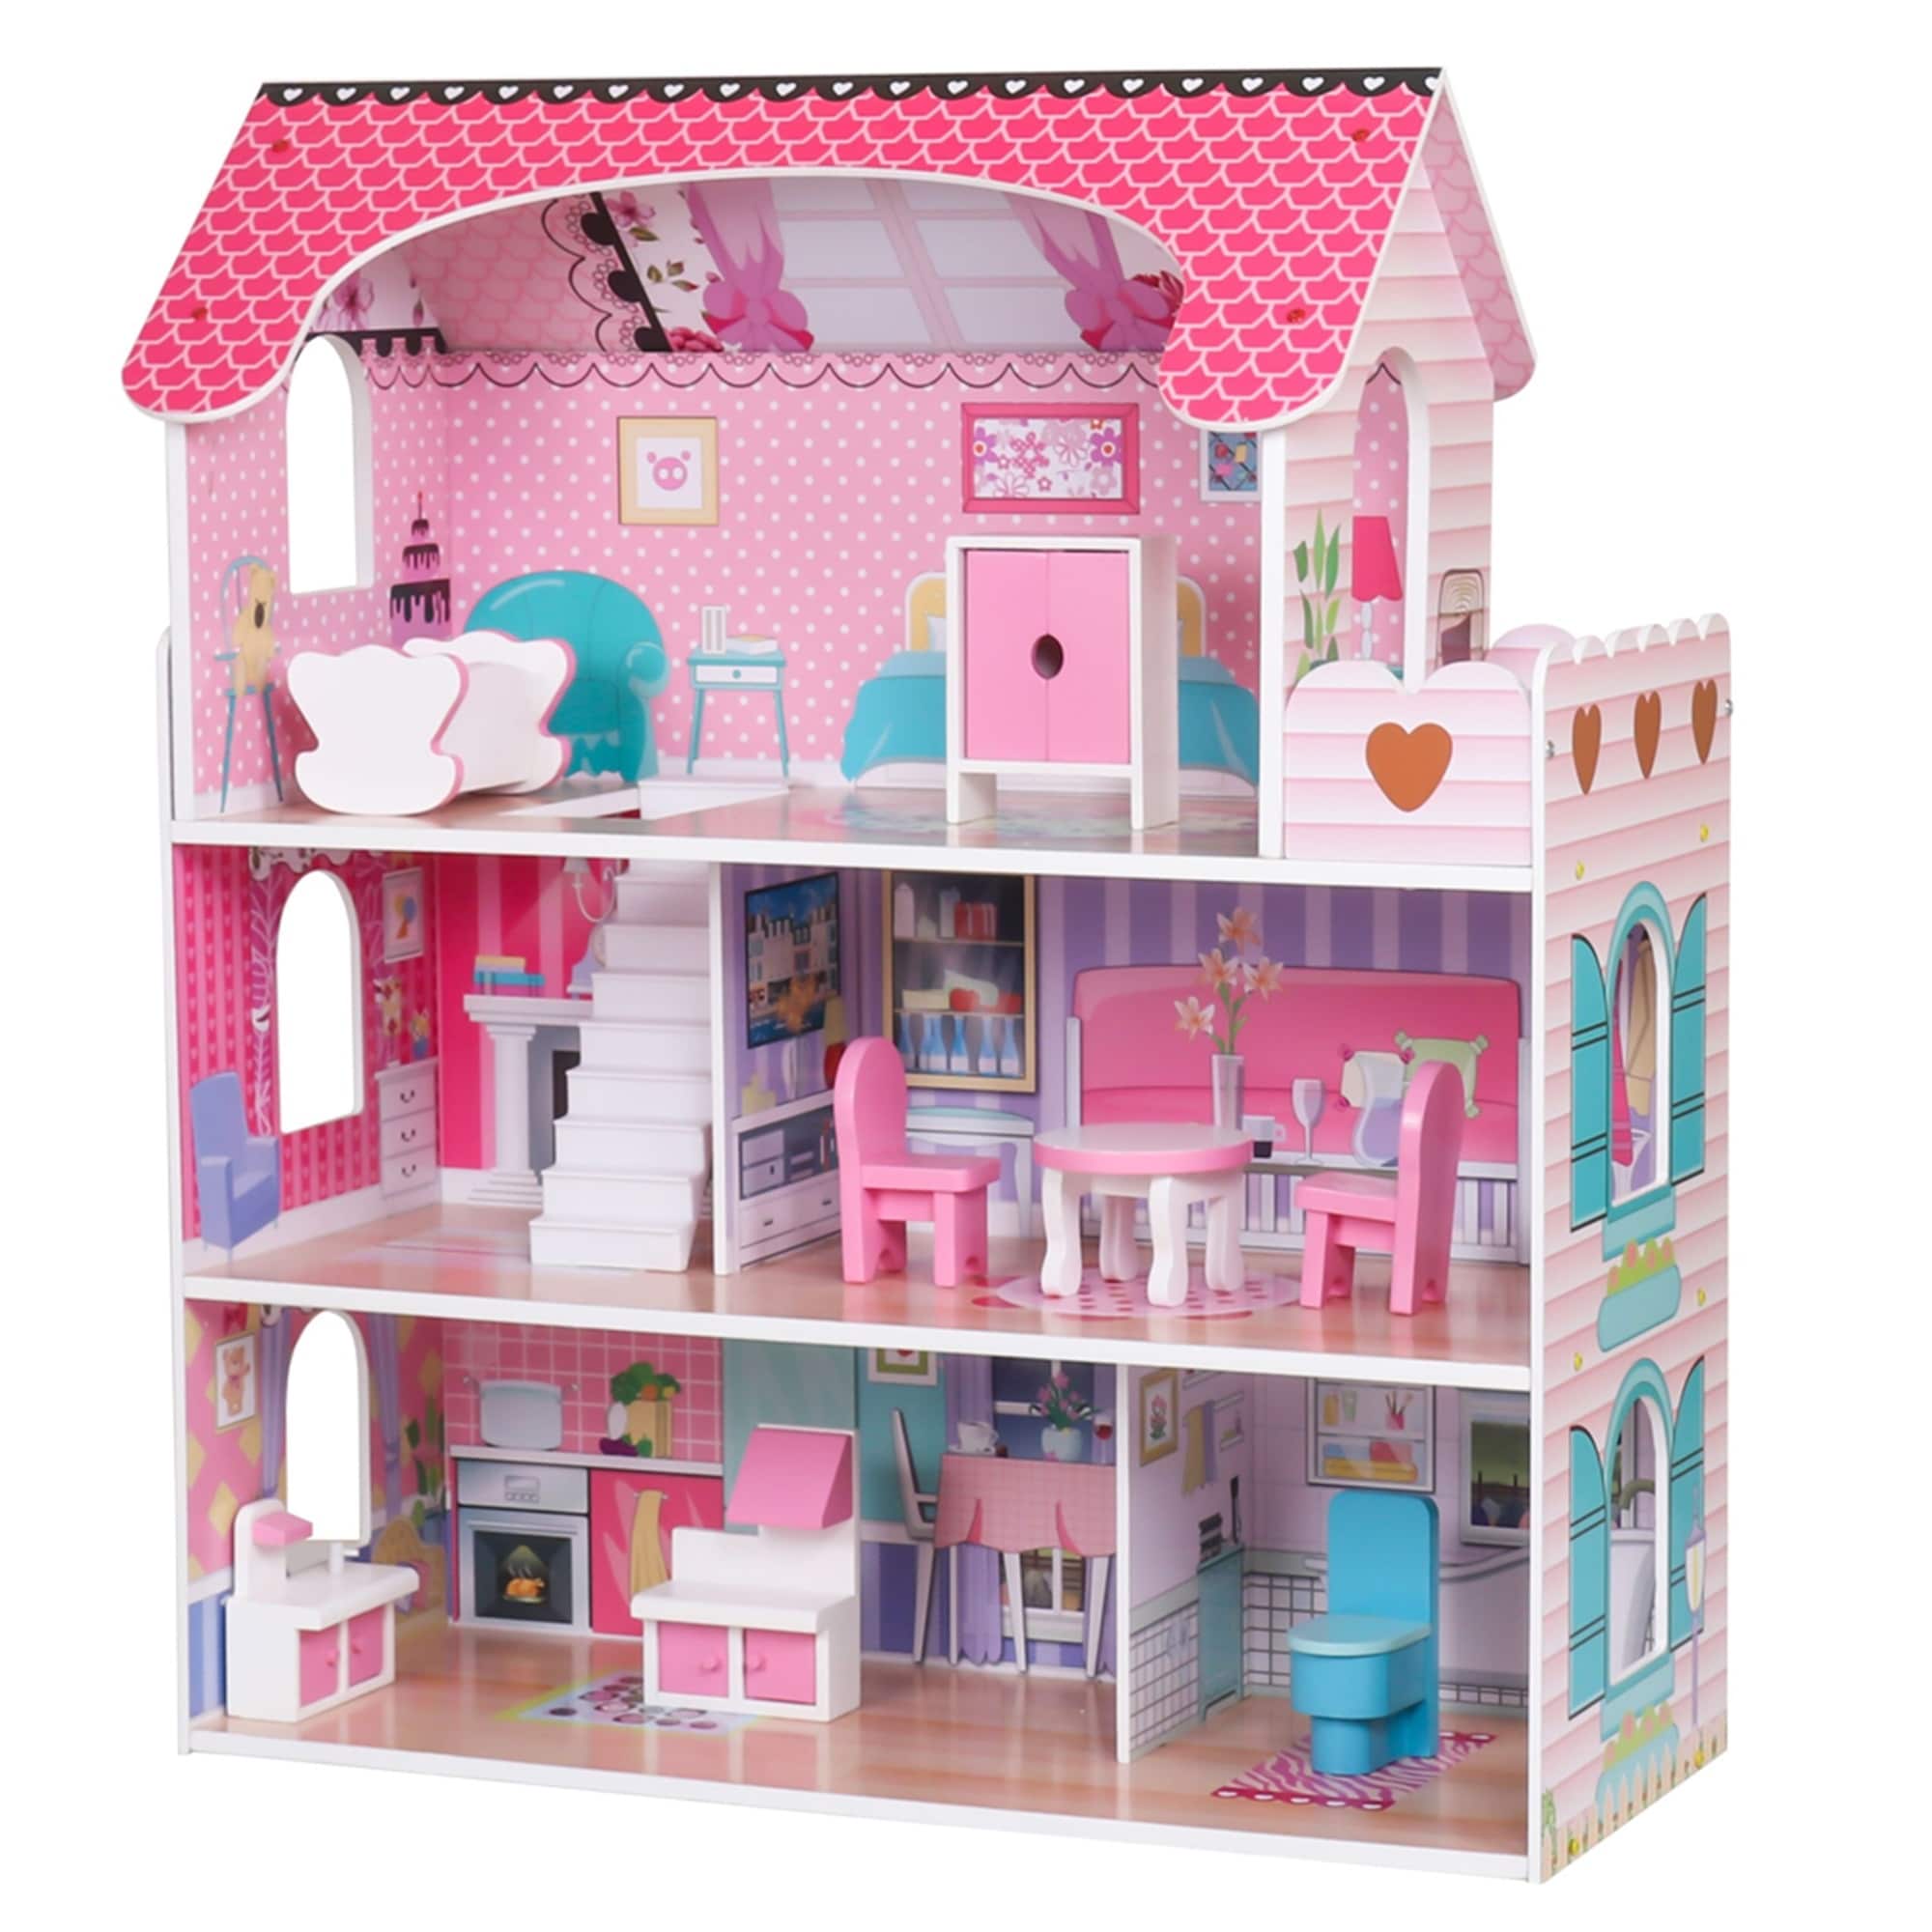 Large Wooden Dollhouse Barbie Doll House Pink Children Kids Pretend Play Home 